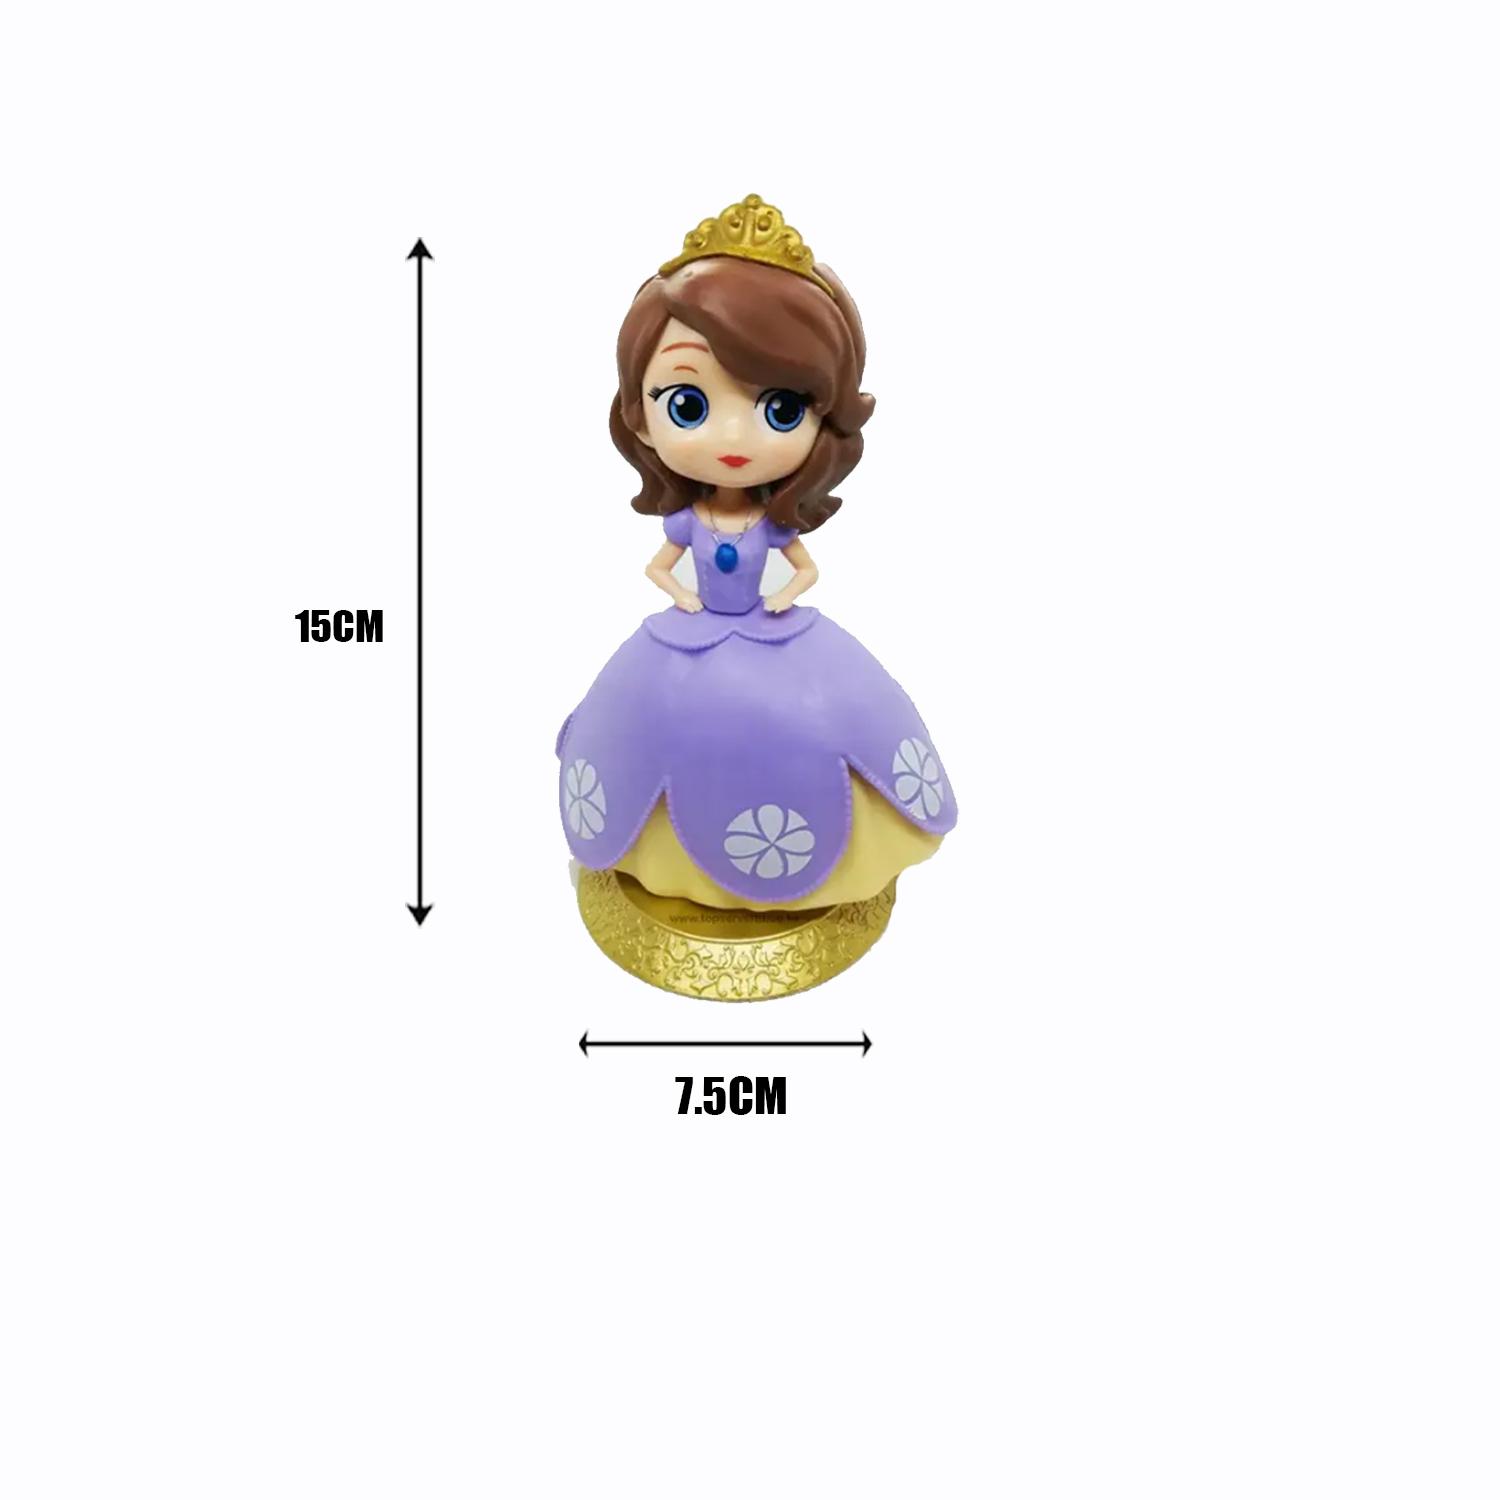 SOFIA THE FIRST DOLL